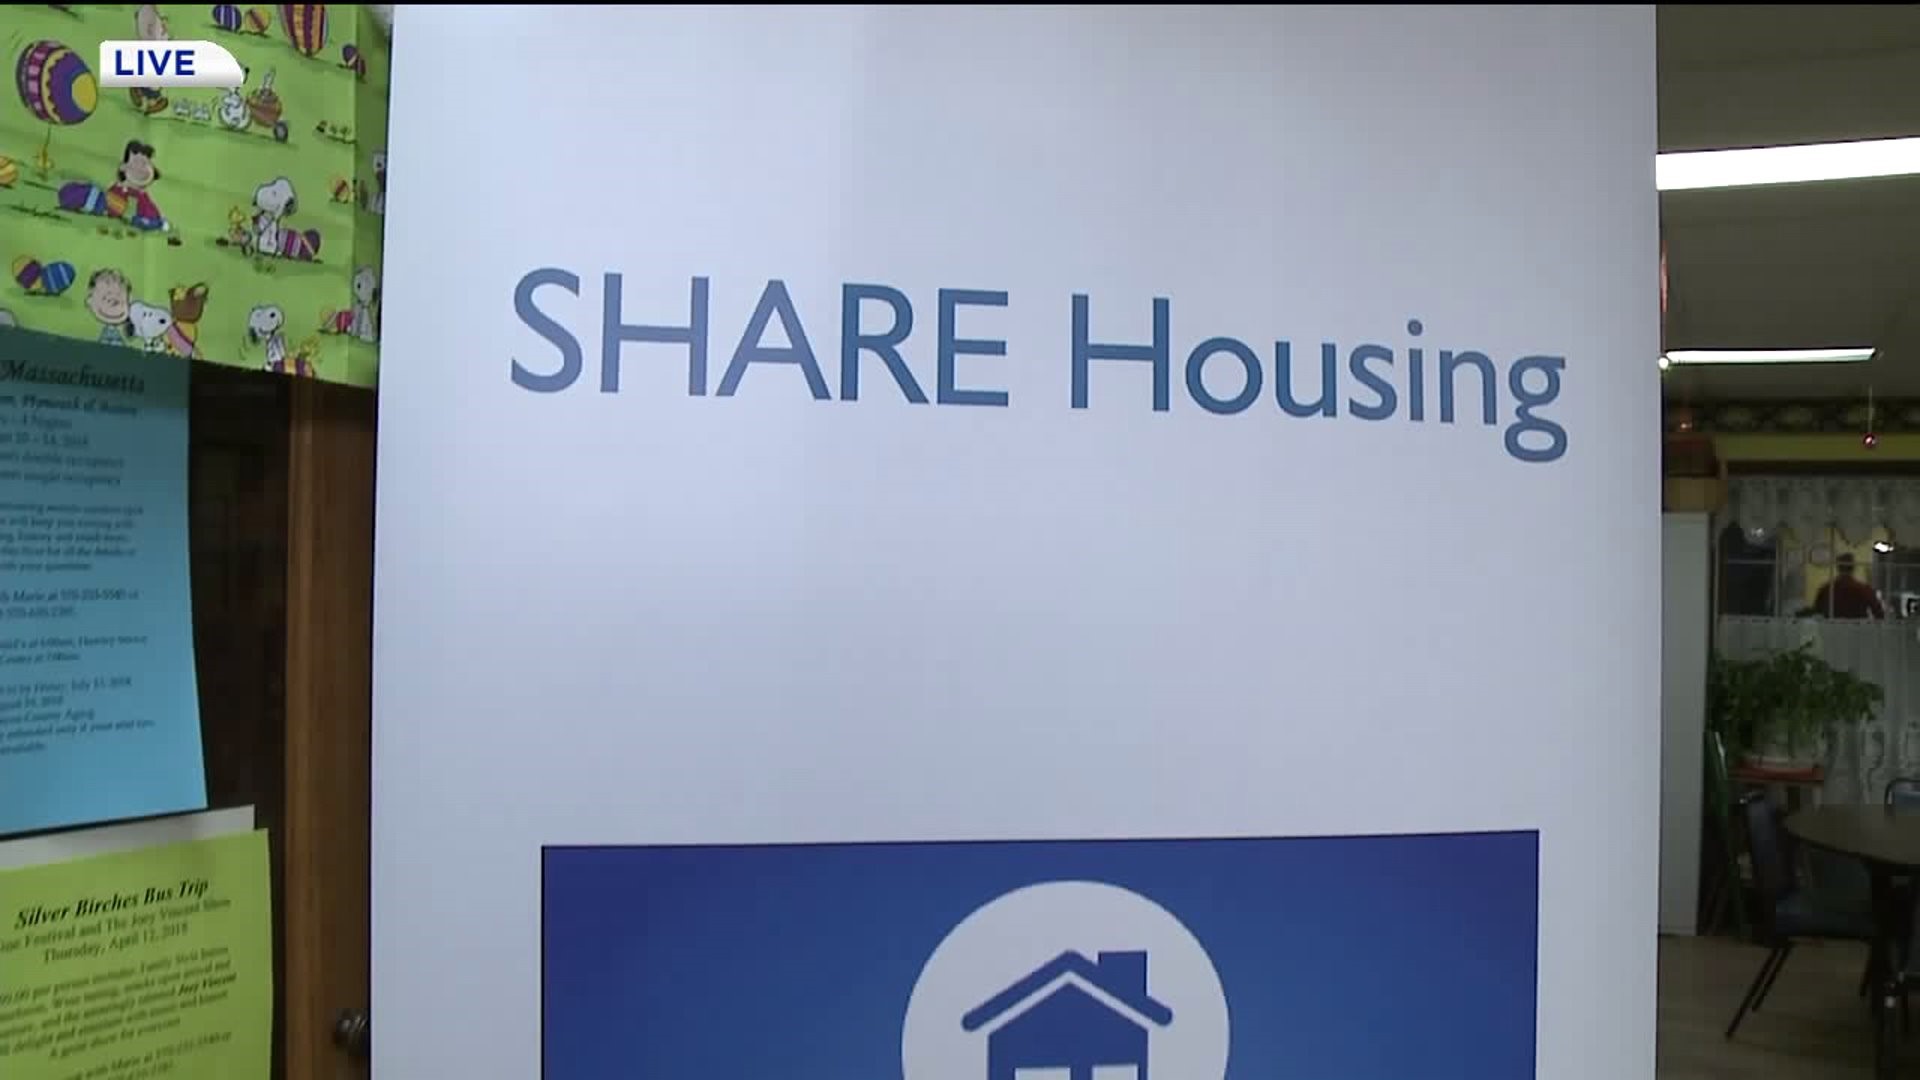 SHARE Housing: It Pays to Share